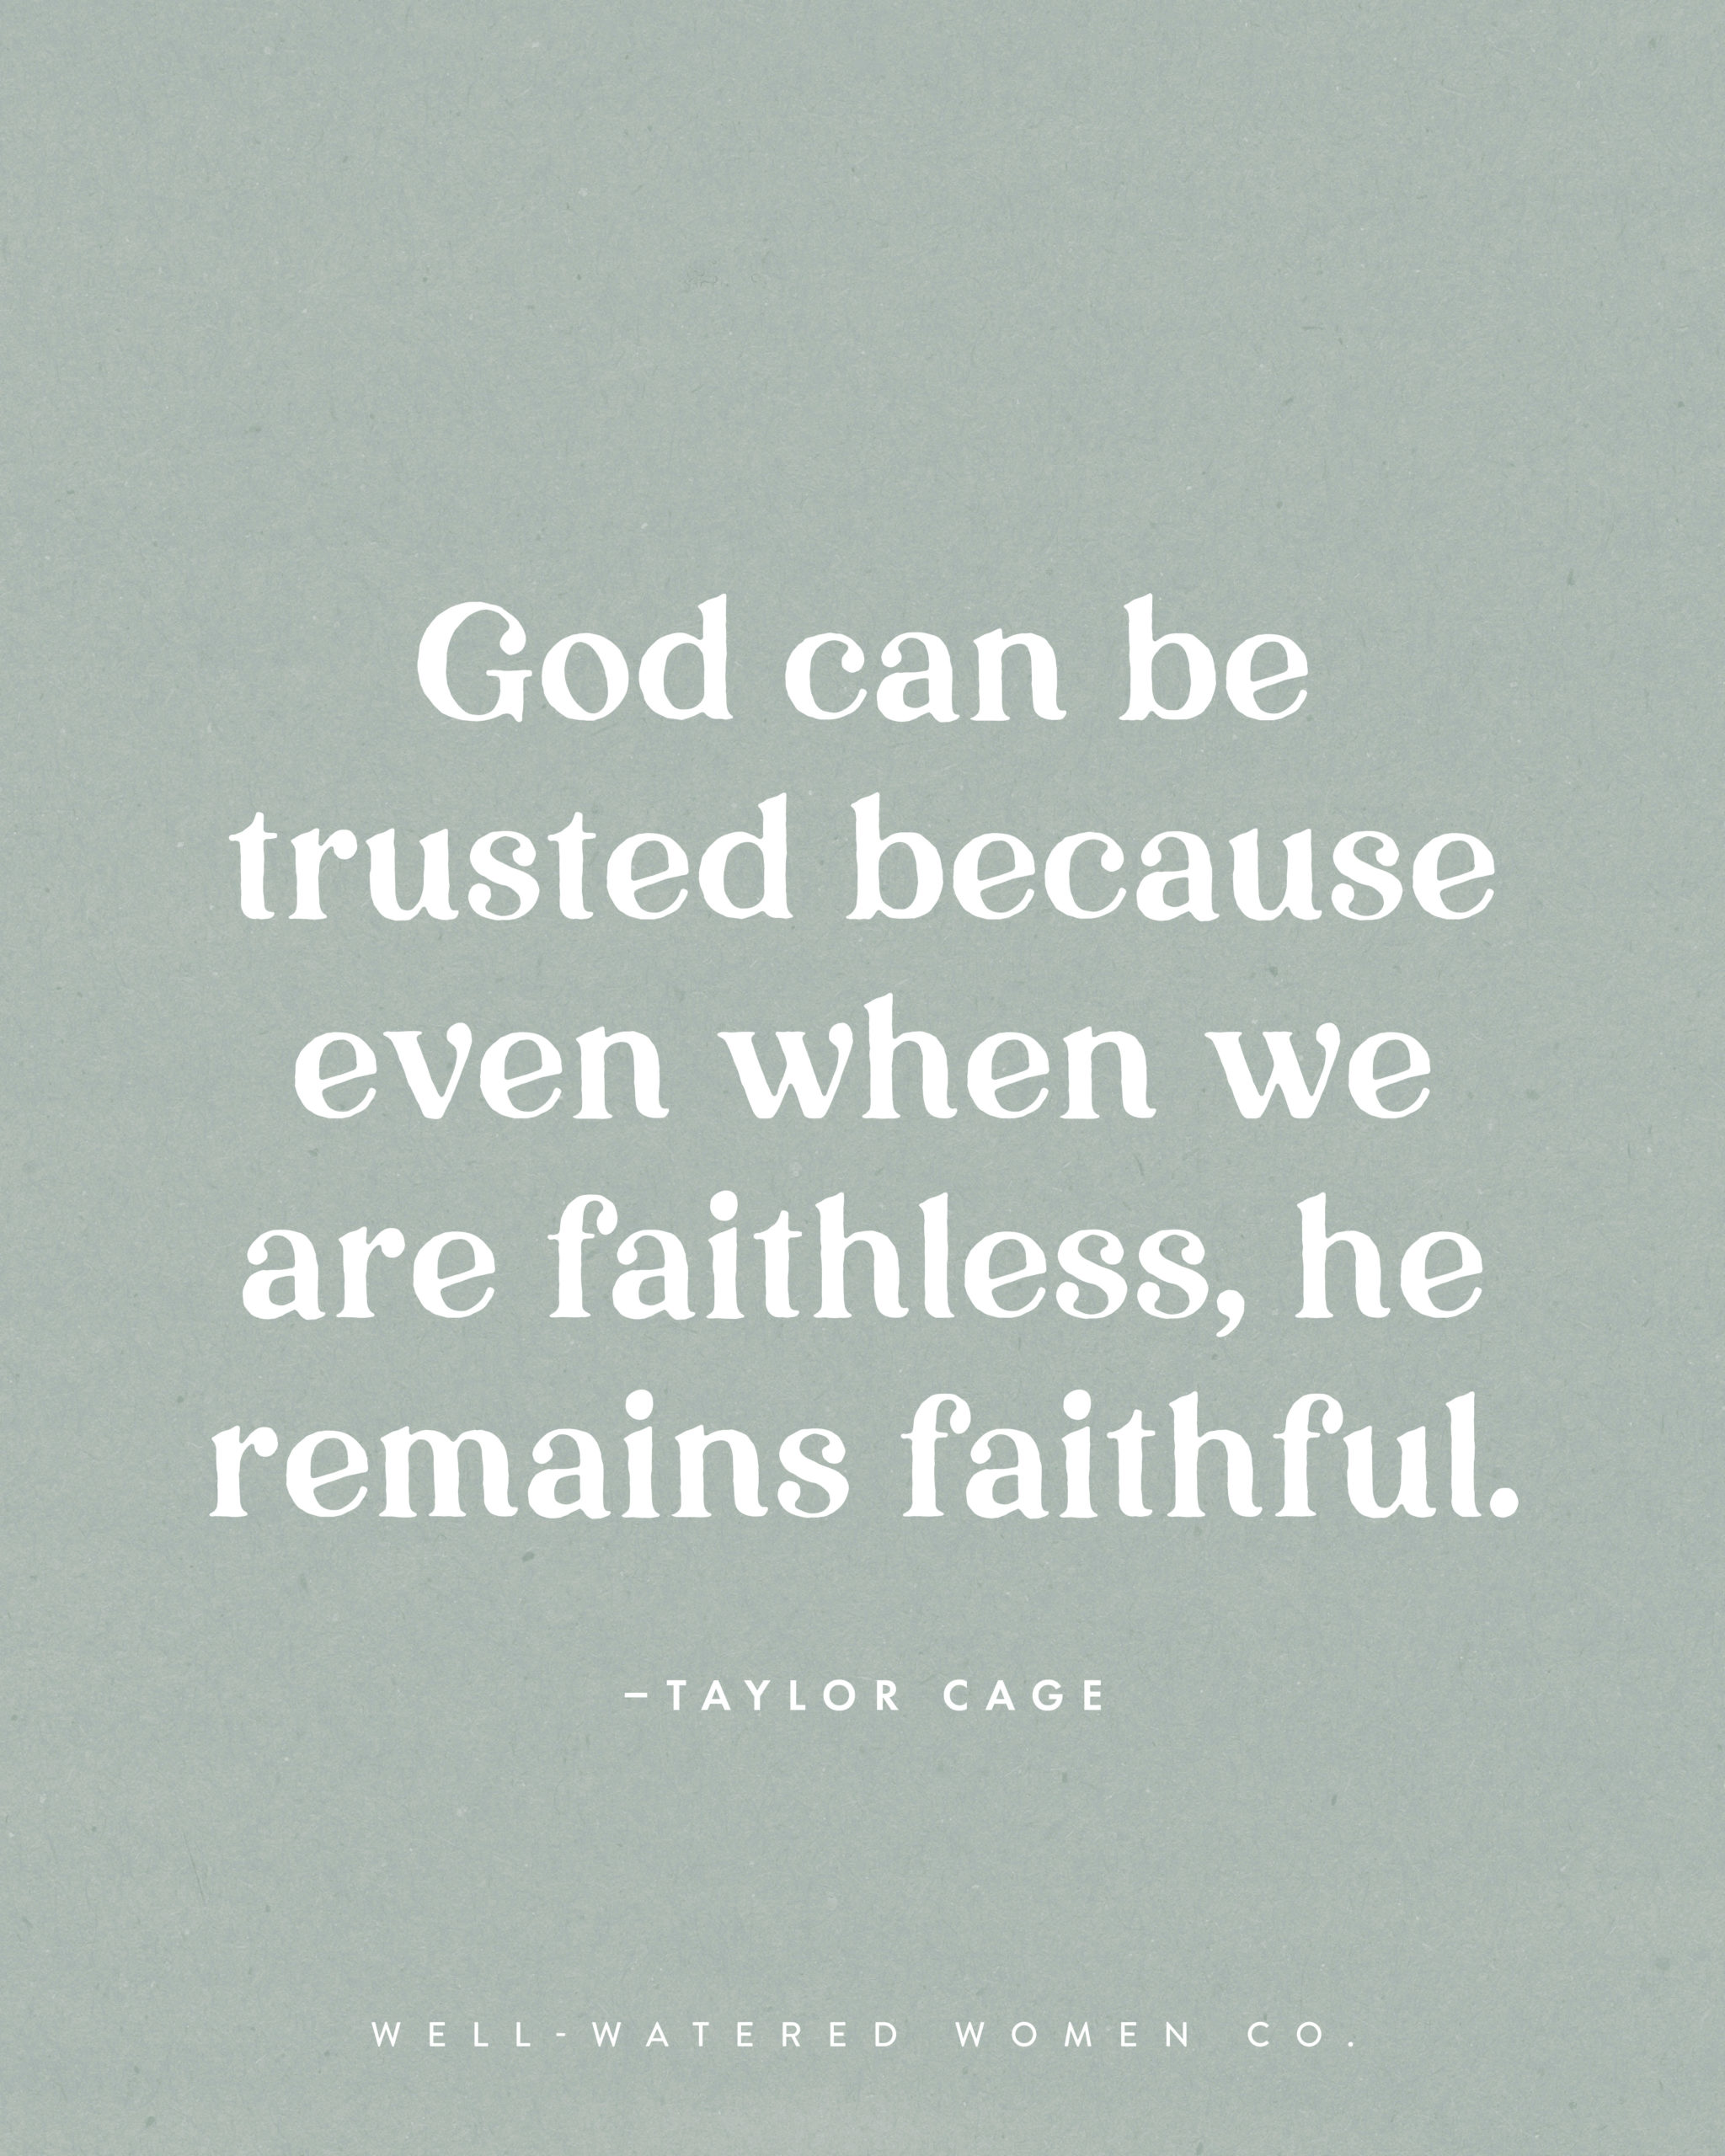 Can God Be Trusted? - an article from Well-Watered Women - quote